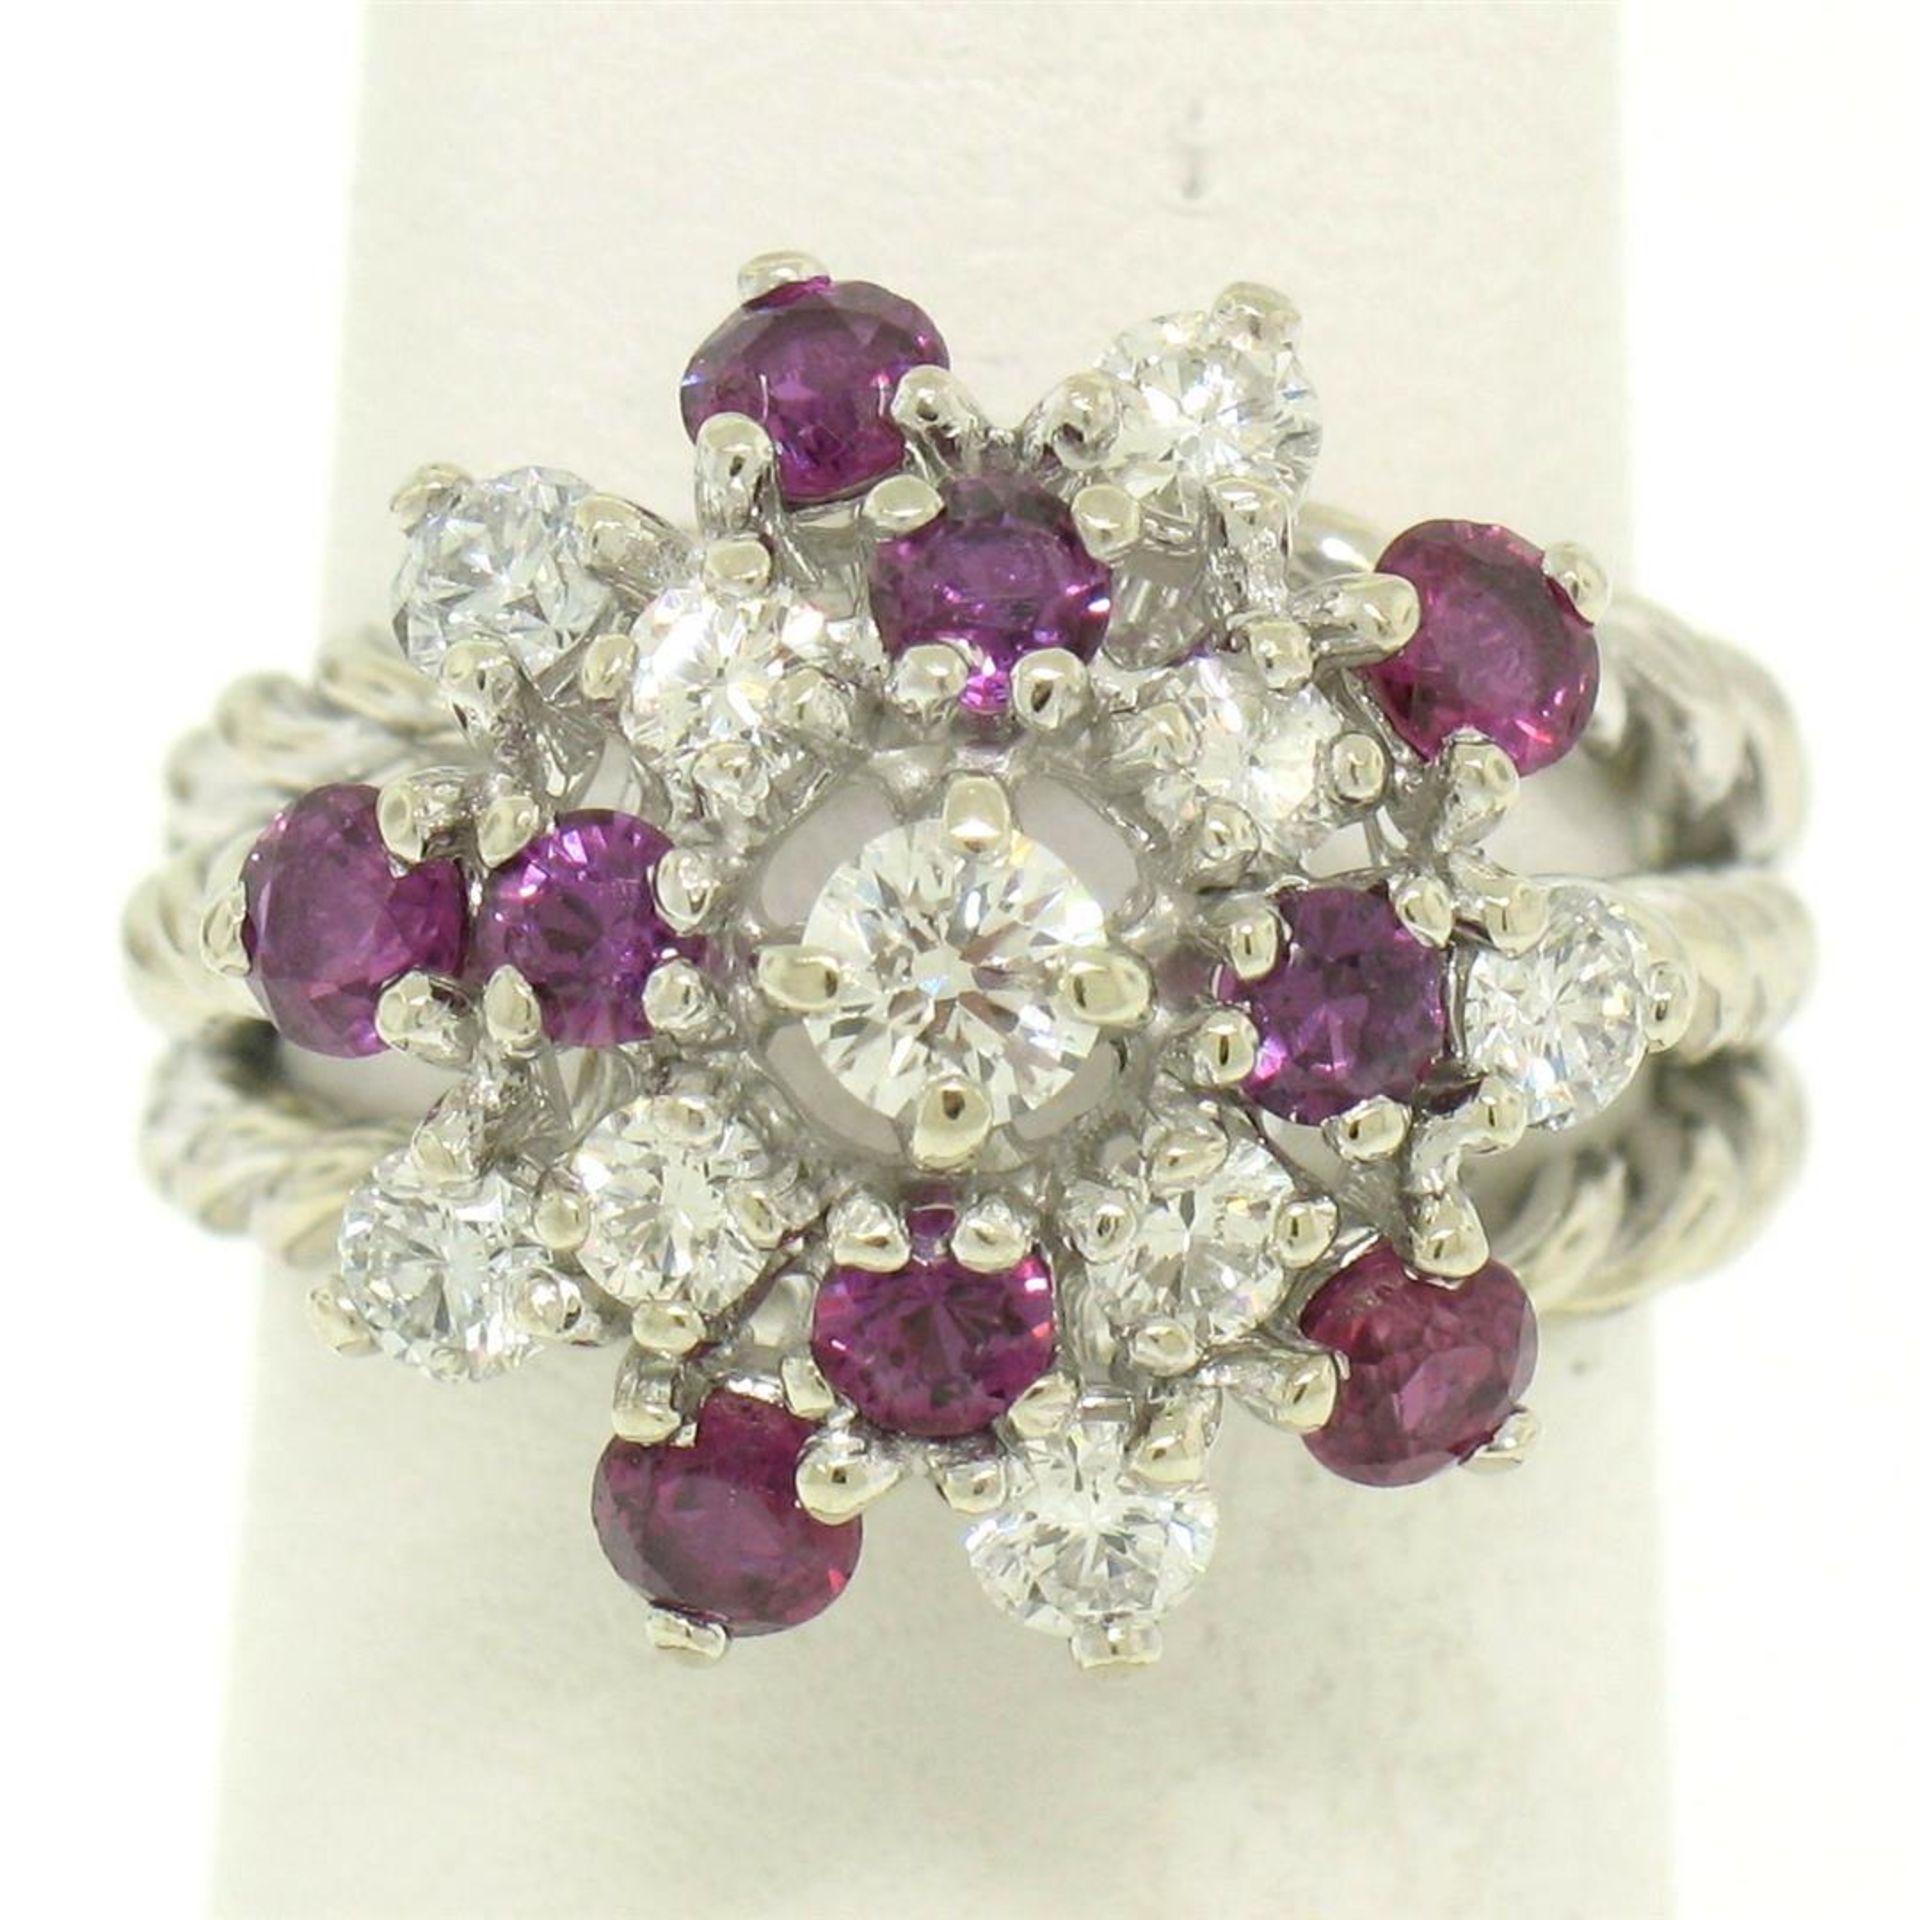 14K White Gold 2.10 ctw Diamond & Ruby Cluster Daisy Twisted Wire Cocktail Ring - Image 6 of 9